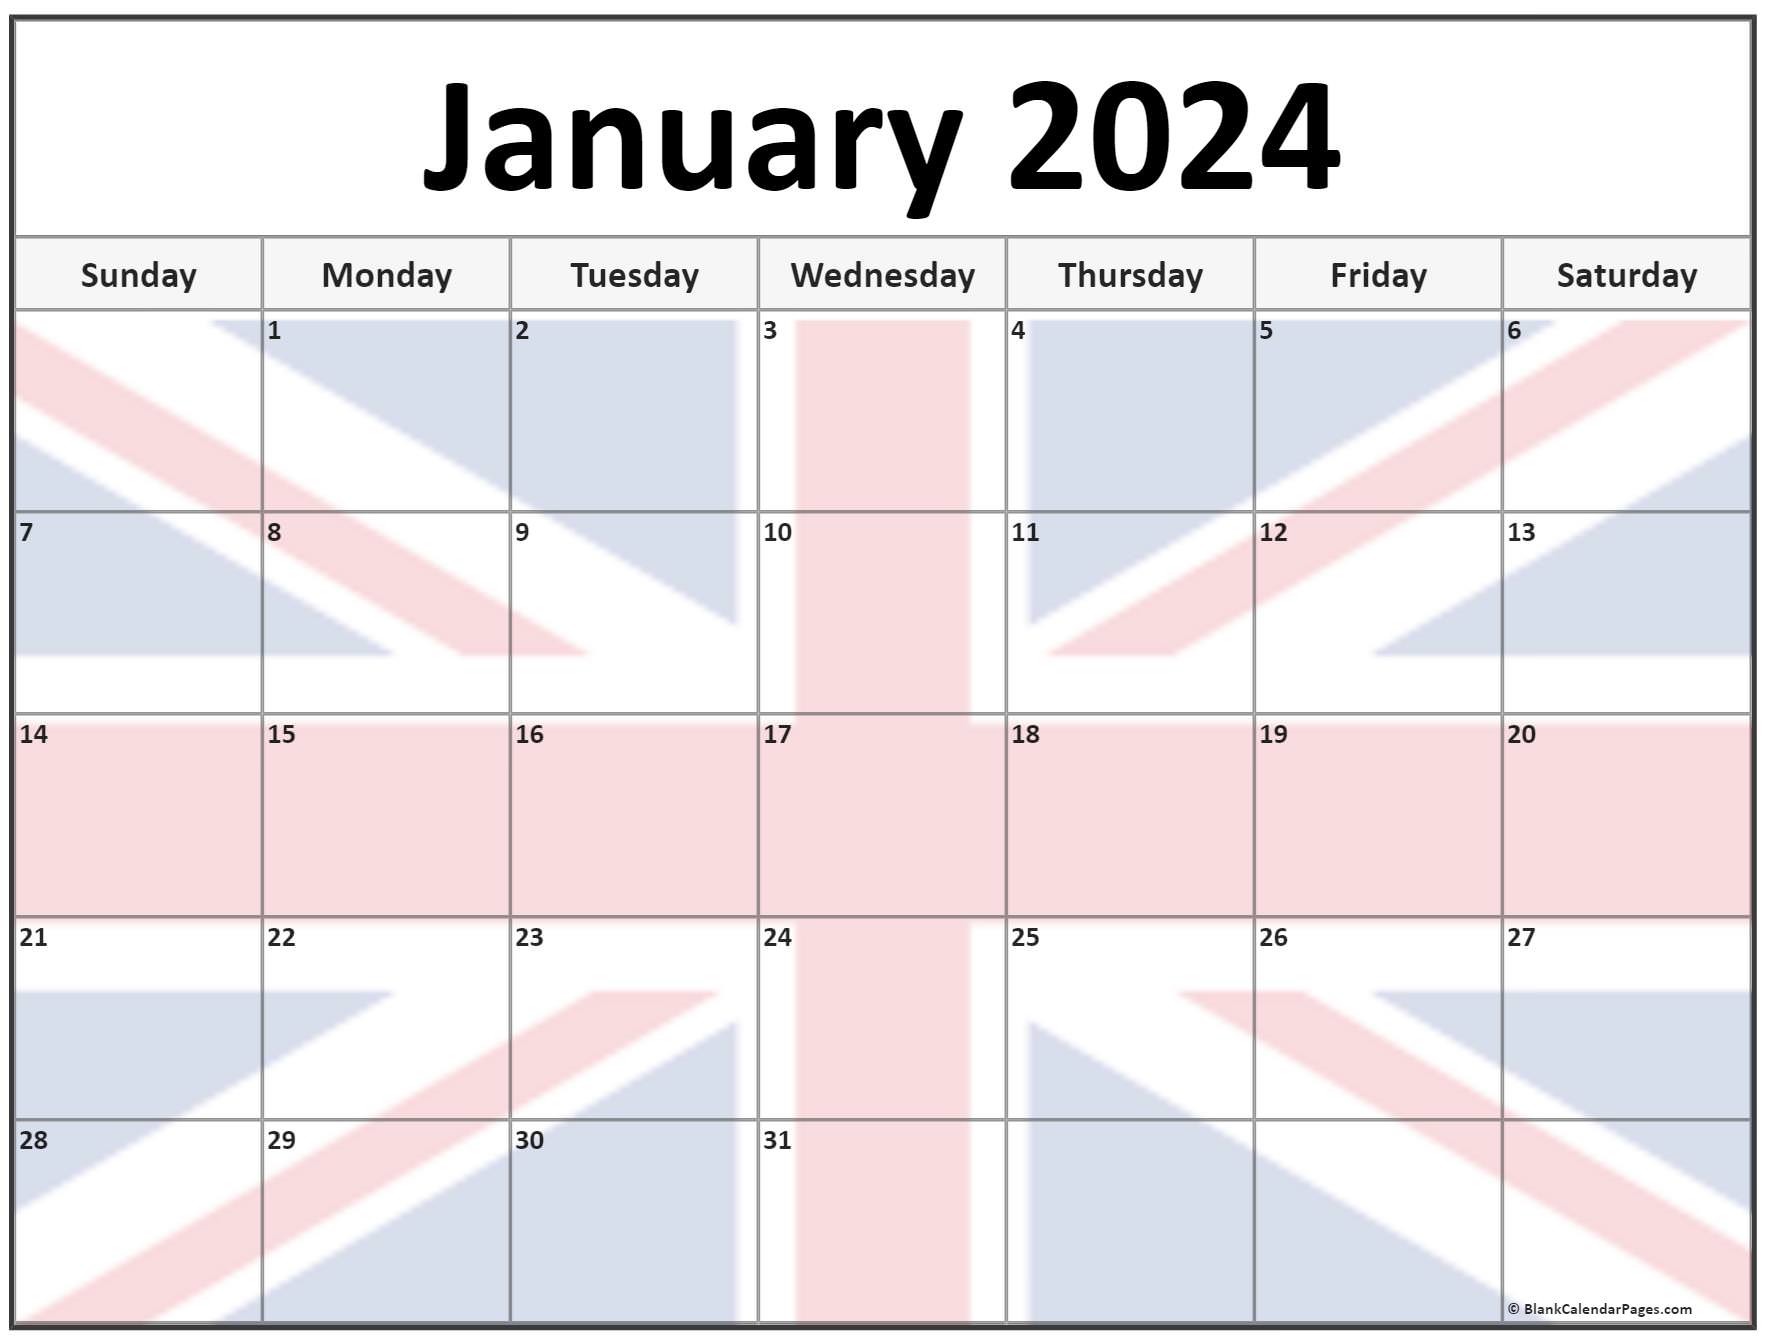 collection-of-january-2022-photo-calendars-with-image-filters